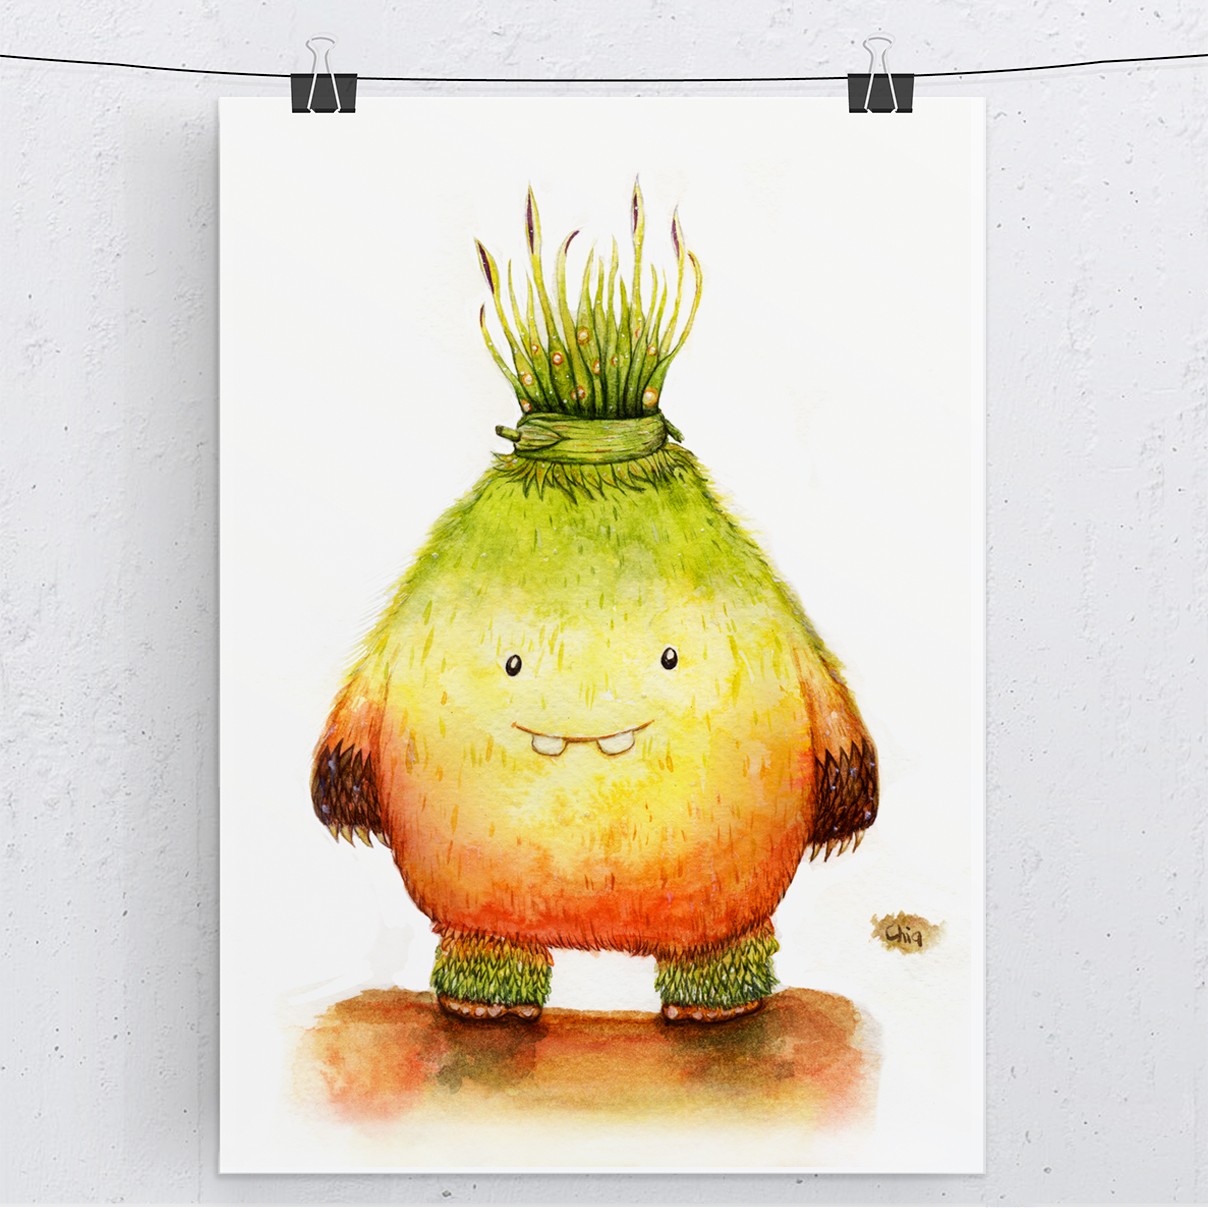 Portraits and Notes of Plant Creatures | Chia Studio